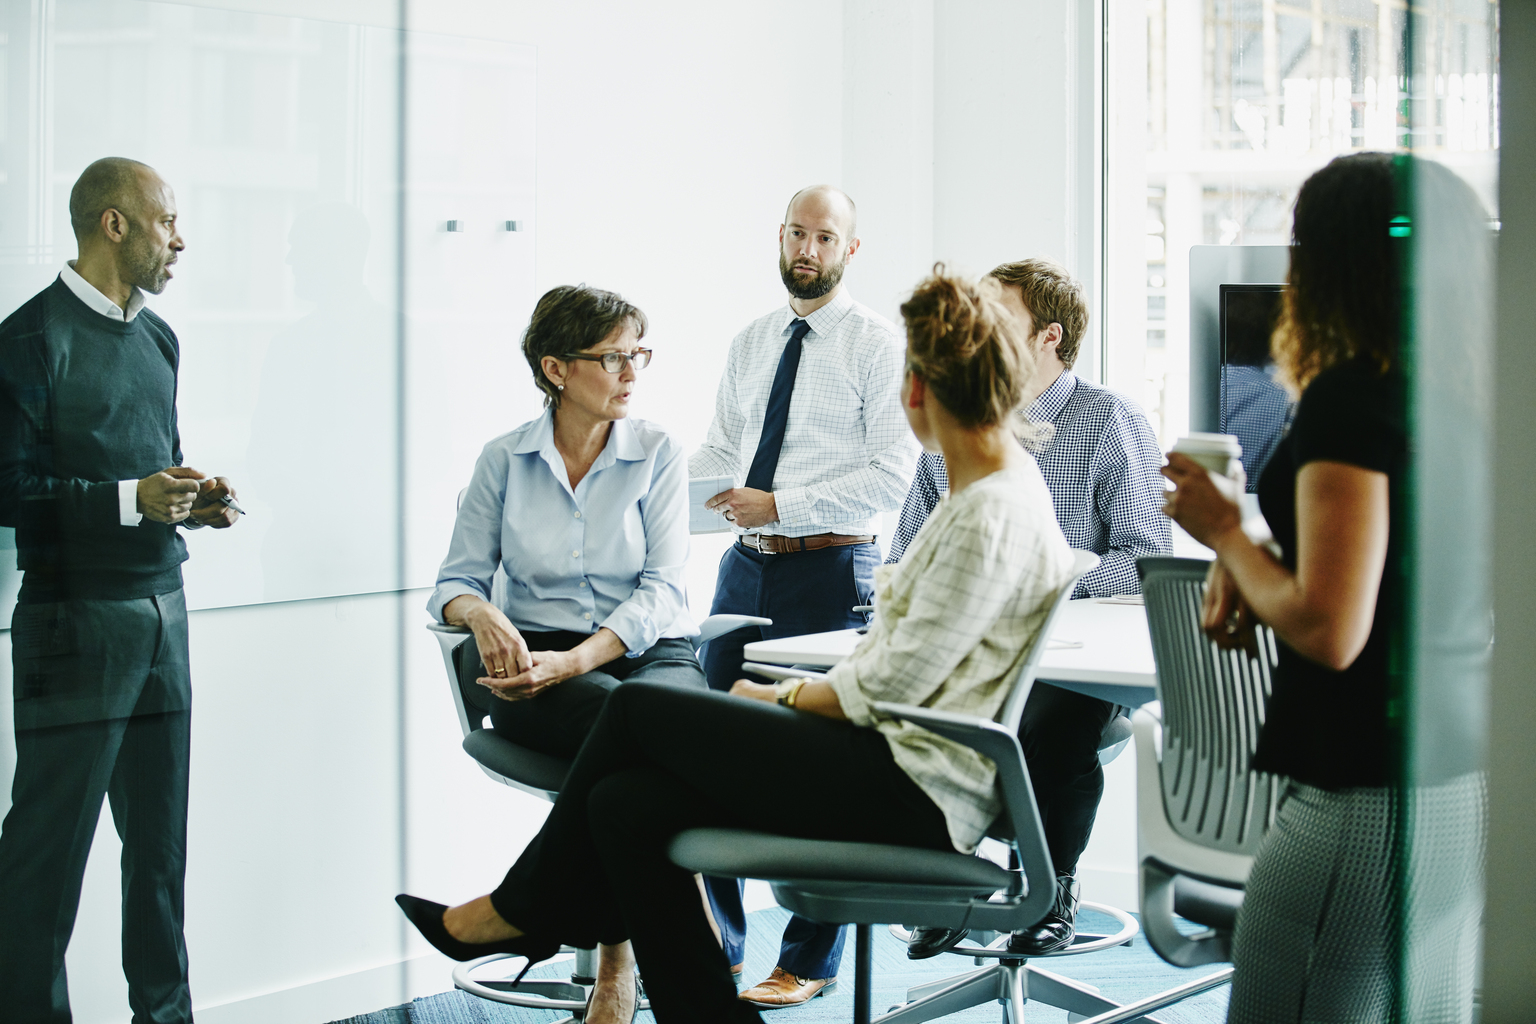 Mature businesswoman leading discussion with colleagues during team meeting in conference room